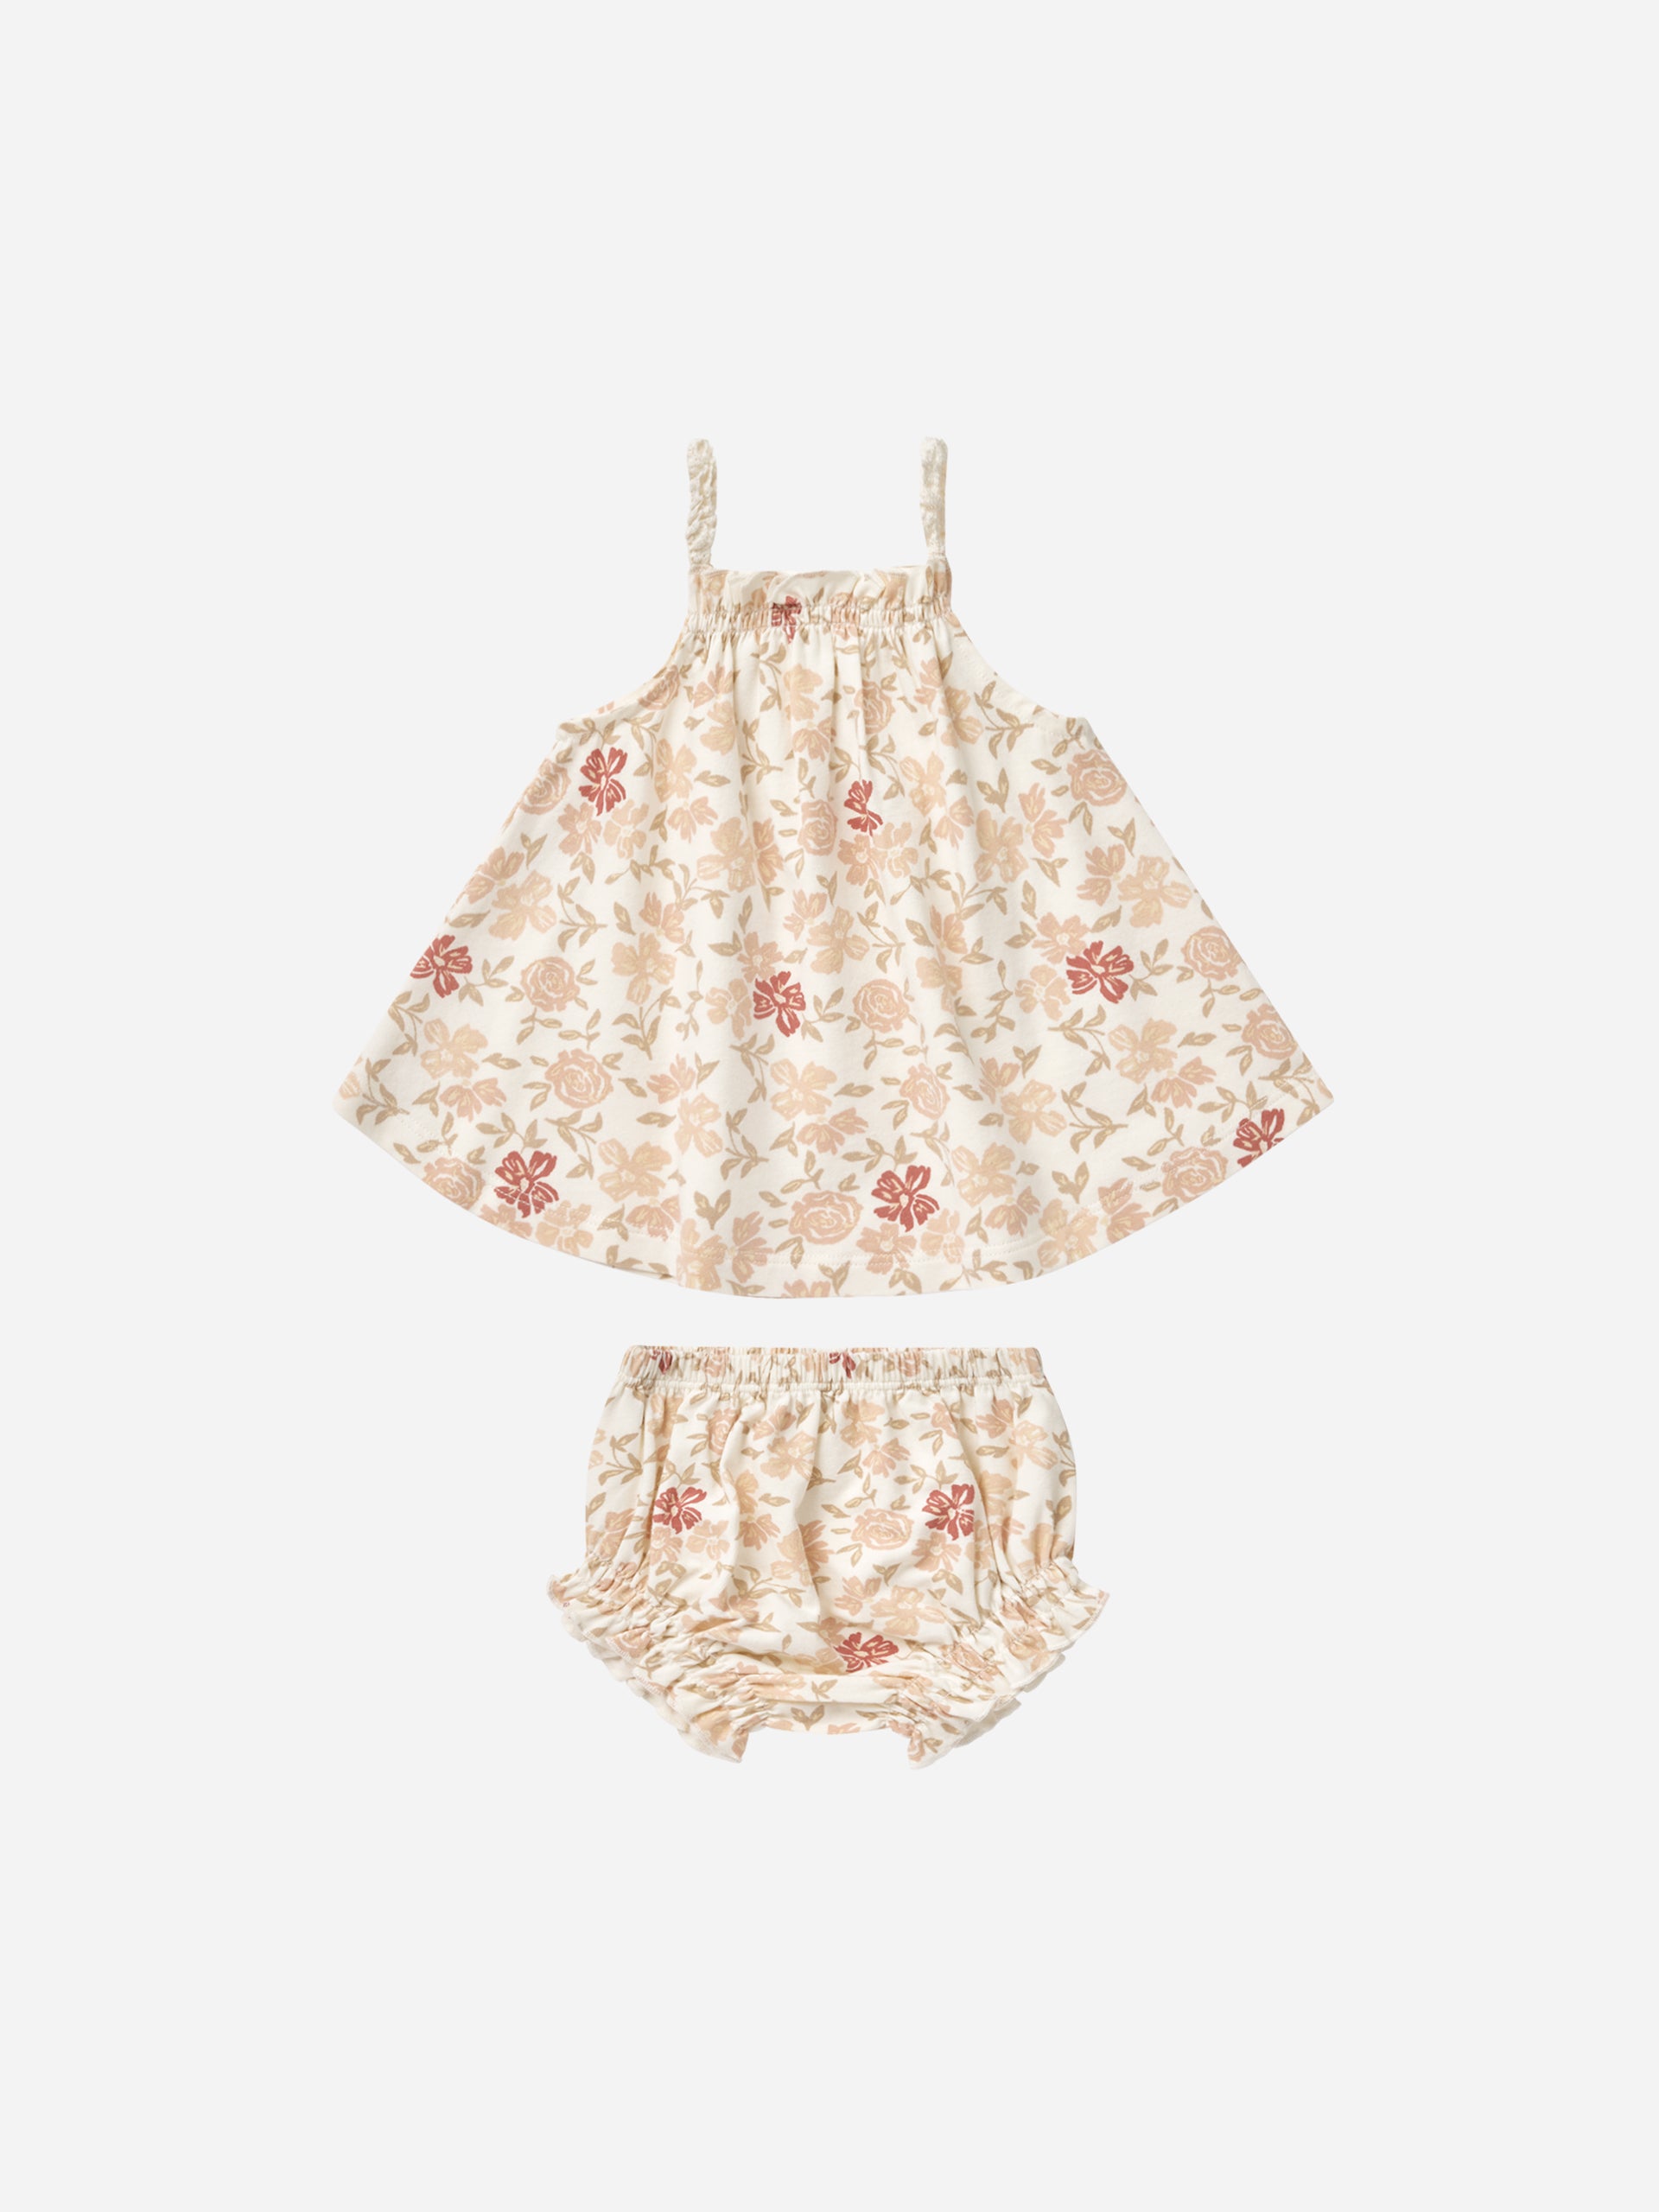 Swing Top + Bloomer Set || Pink Floral - Rylee + Cru | Kids Clothes | Trendy Baby Clothes | Modern Infant Outfits |